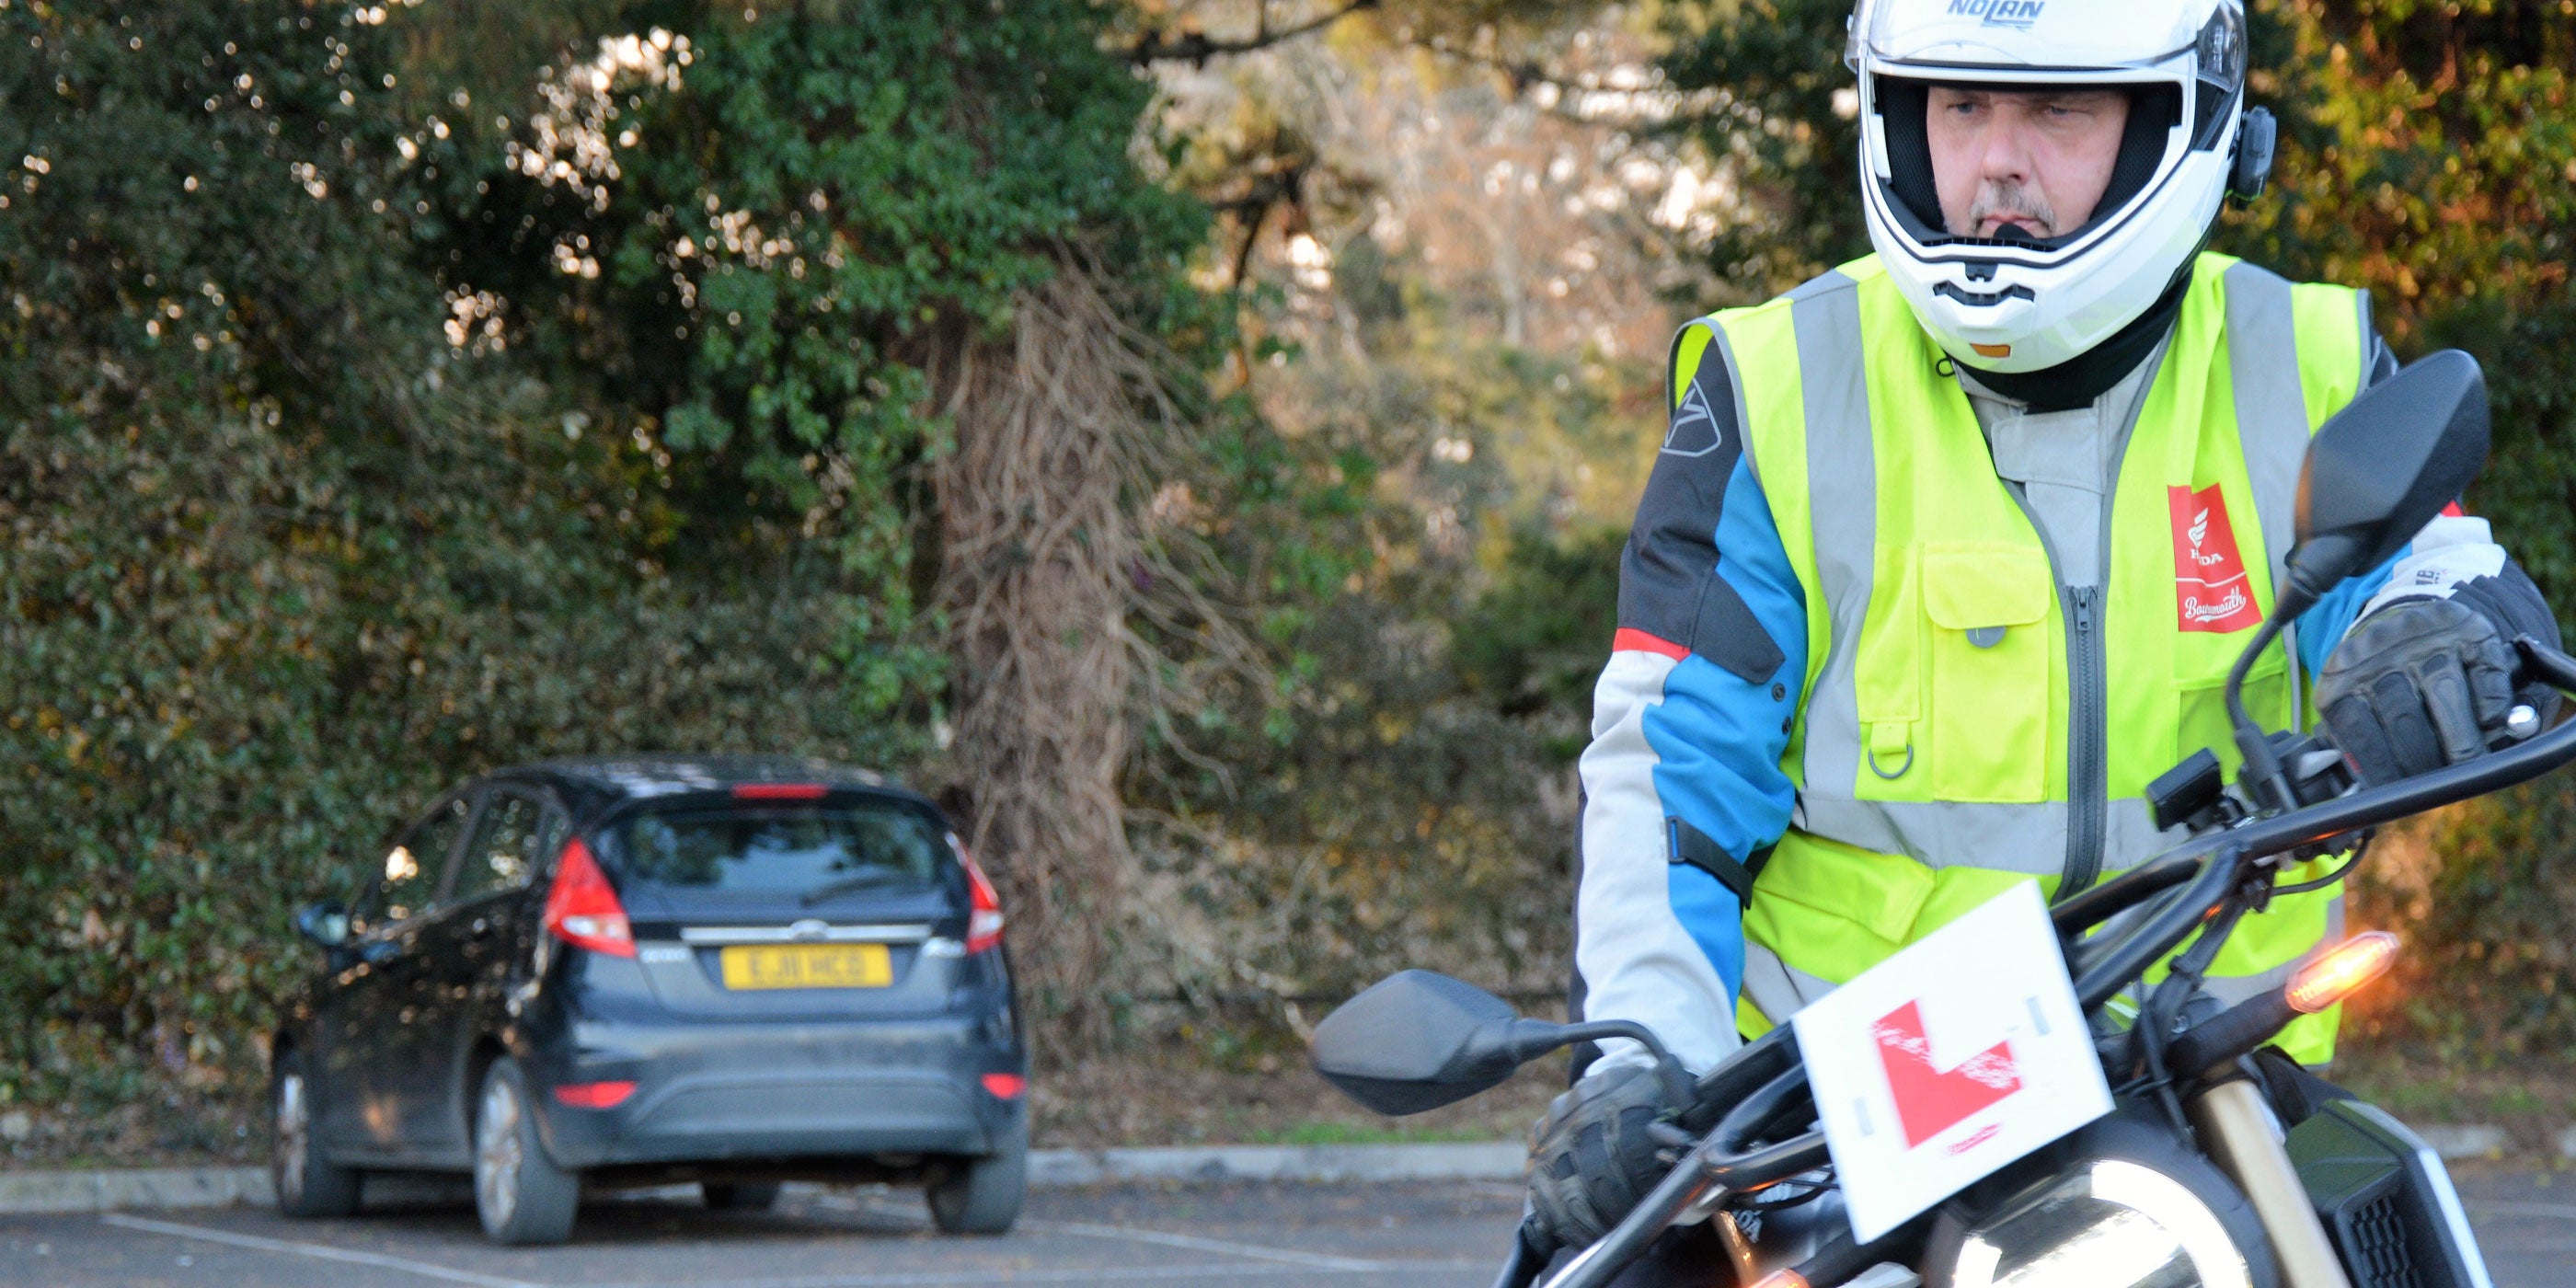 CBT Bournemouth | Full License Motorbike Course | Motorcycle Training Bournemouth & Poole, Full License Motorbike Course | Motorcycle Training Bournemouth & Poole, Motorcycle Training Dorset